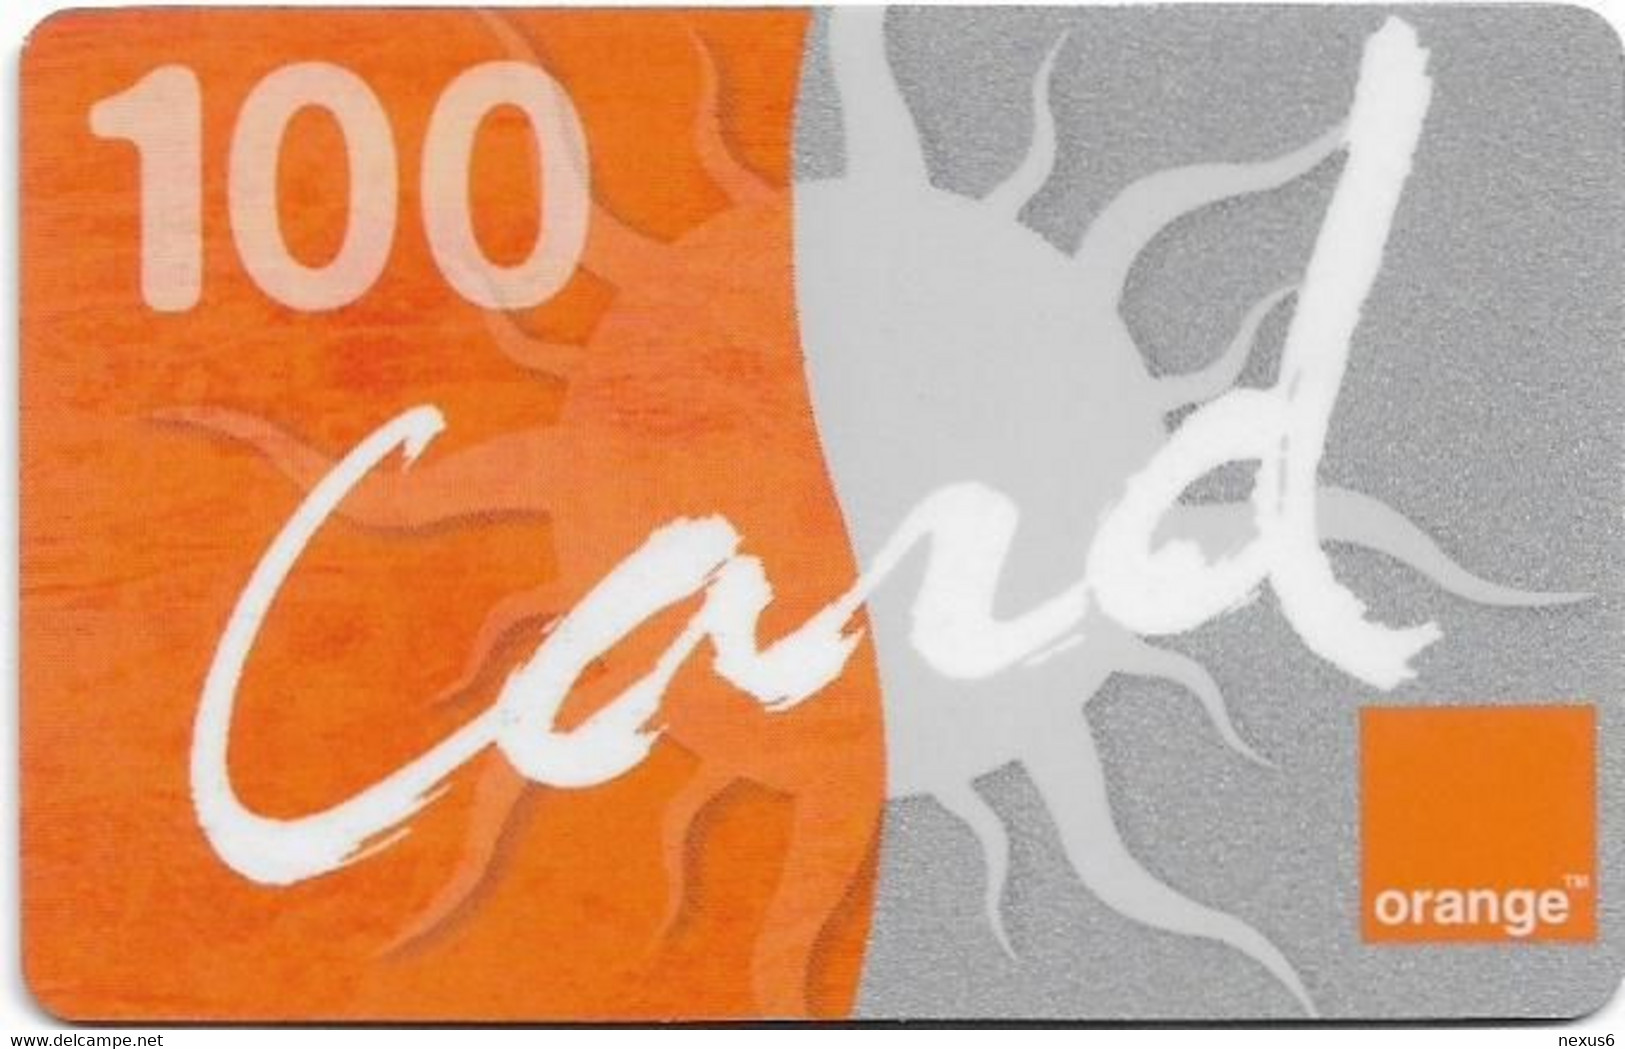 Dominican Rep. - Orange - Card 100, Exp.31.12.2002, GSM Refill 100RD$, Used - Dominicana